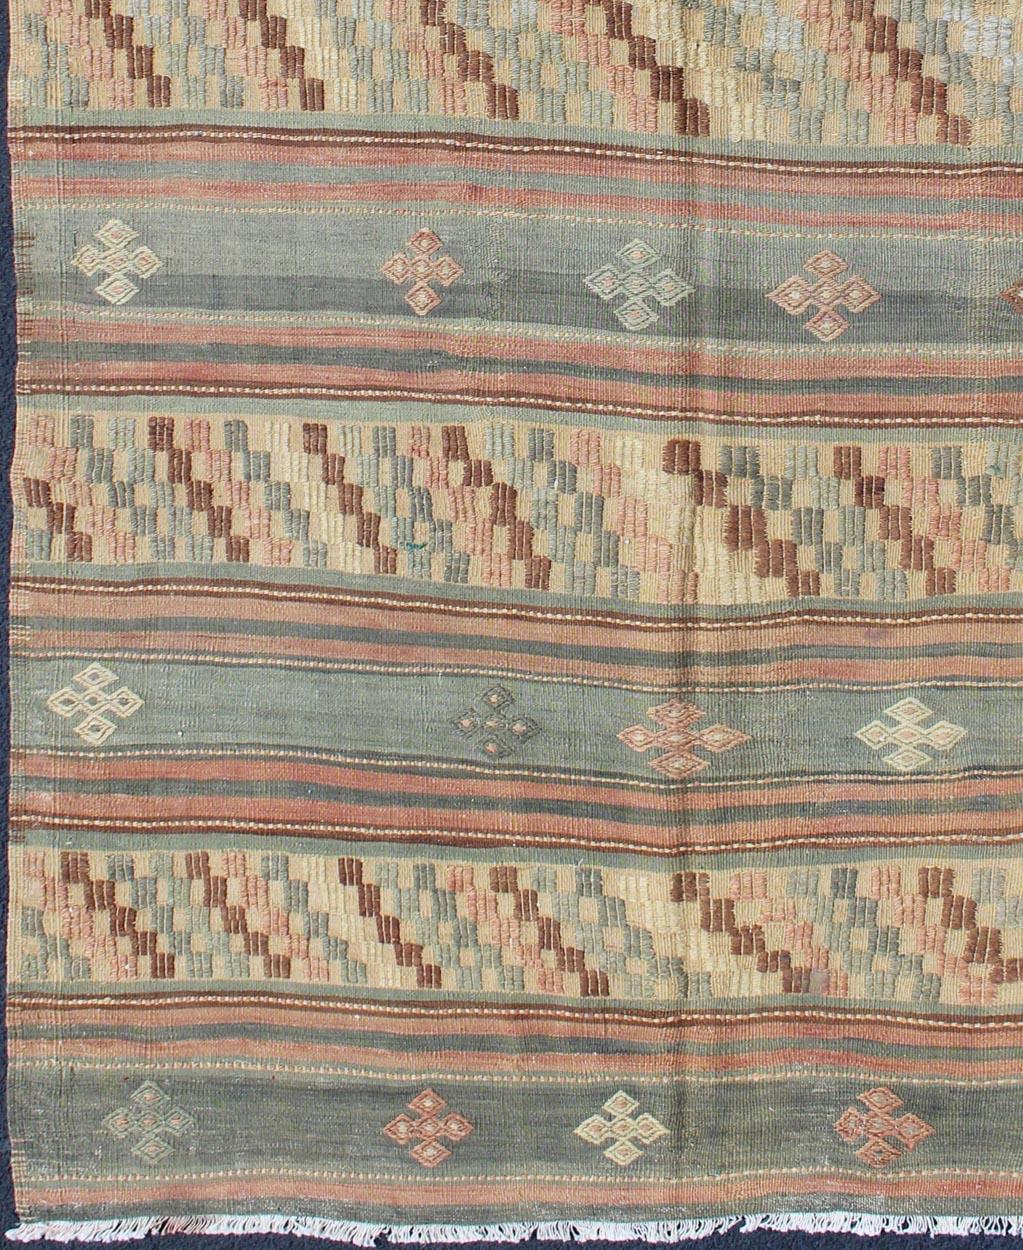 Vintage Turkish Tribal Kilim with Striped Design in Earthy Tones For Sale 1